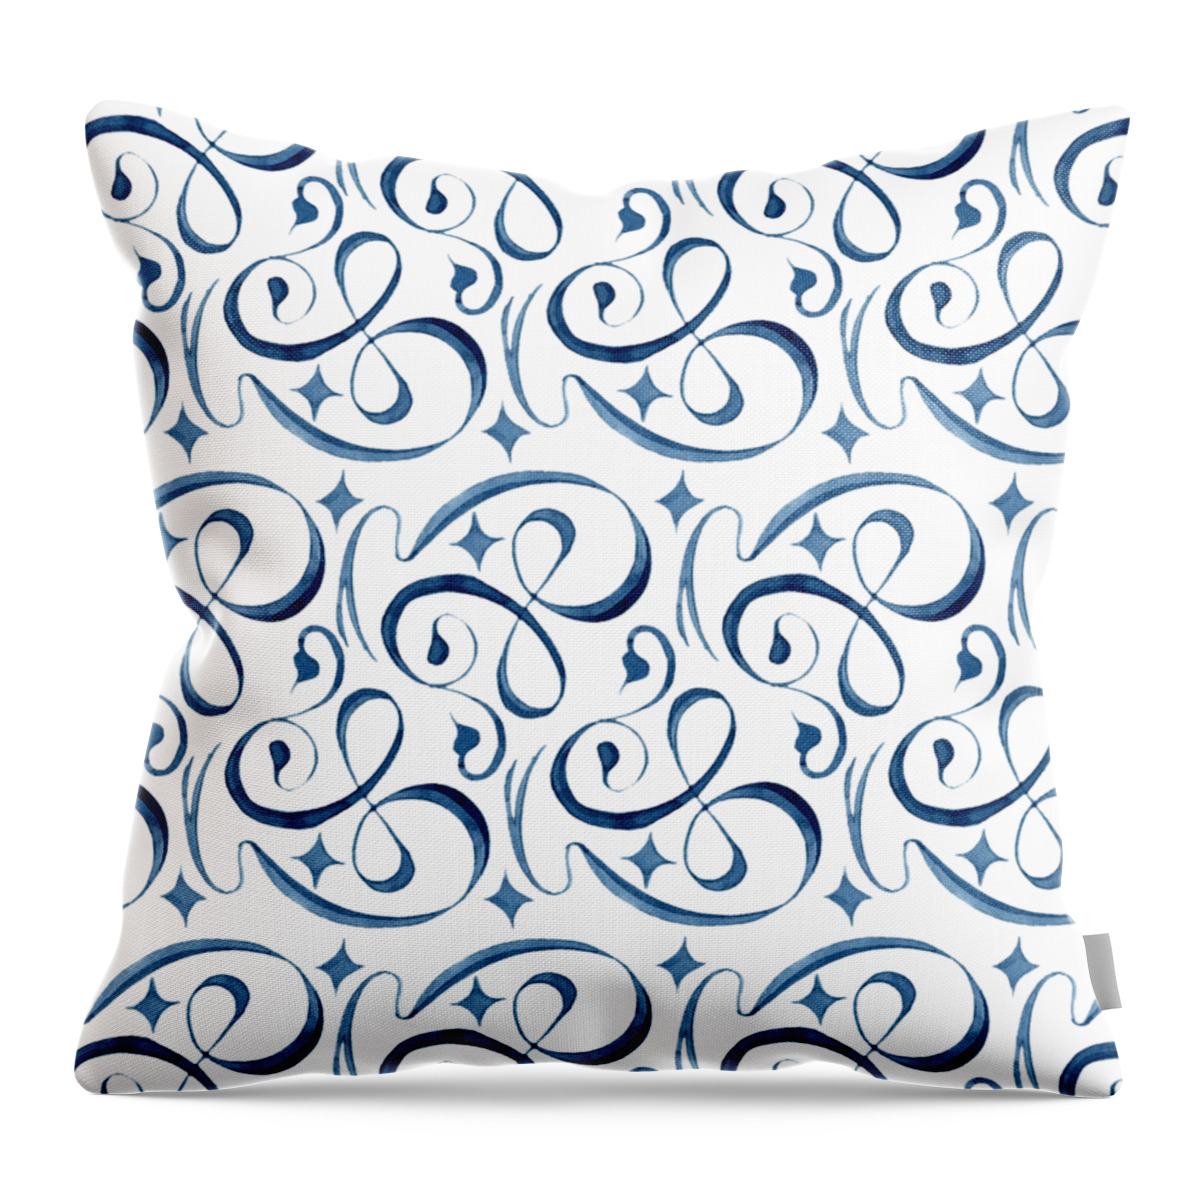 Indigo Blue Throw Pillow featuring the painting Beach House Indigo Star Swirl Scroll Pattern by Audrey Jeanne Roberts